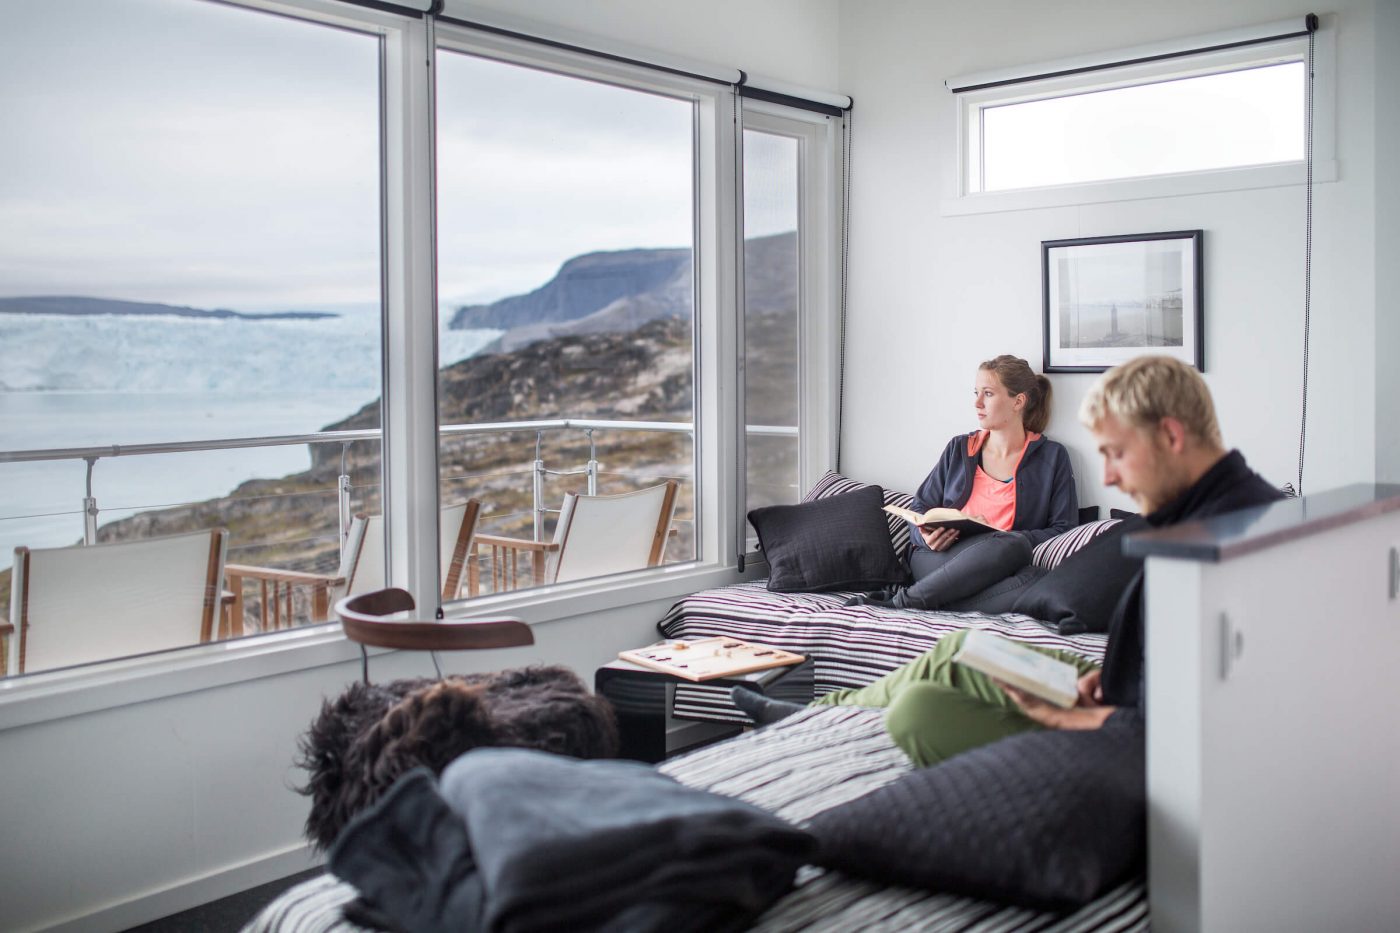 Guests enjoying a quiet moment in one of the Eqi Glacier Lodge comfort huts in Greenland. Photo by Mads Pihl, Visit Greenland